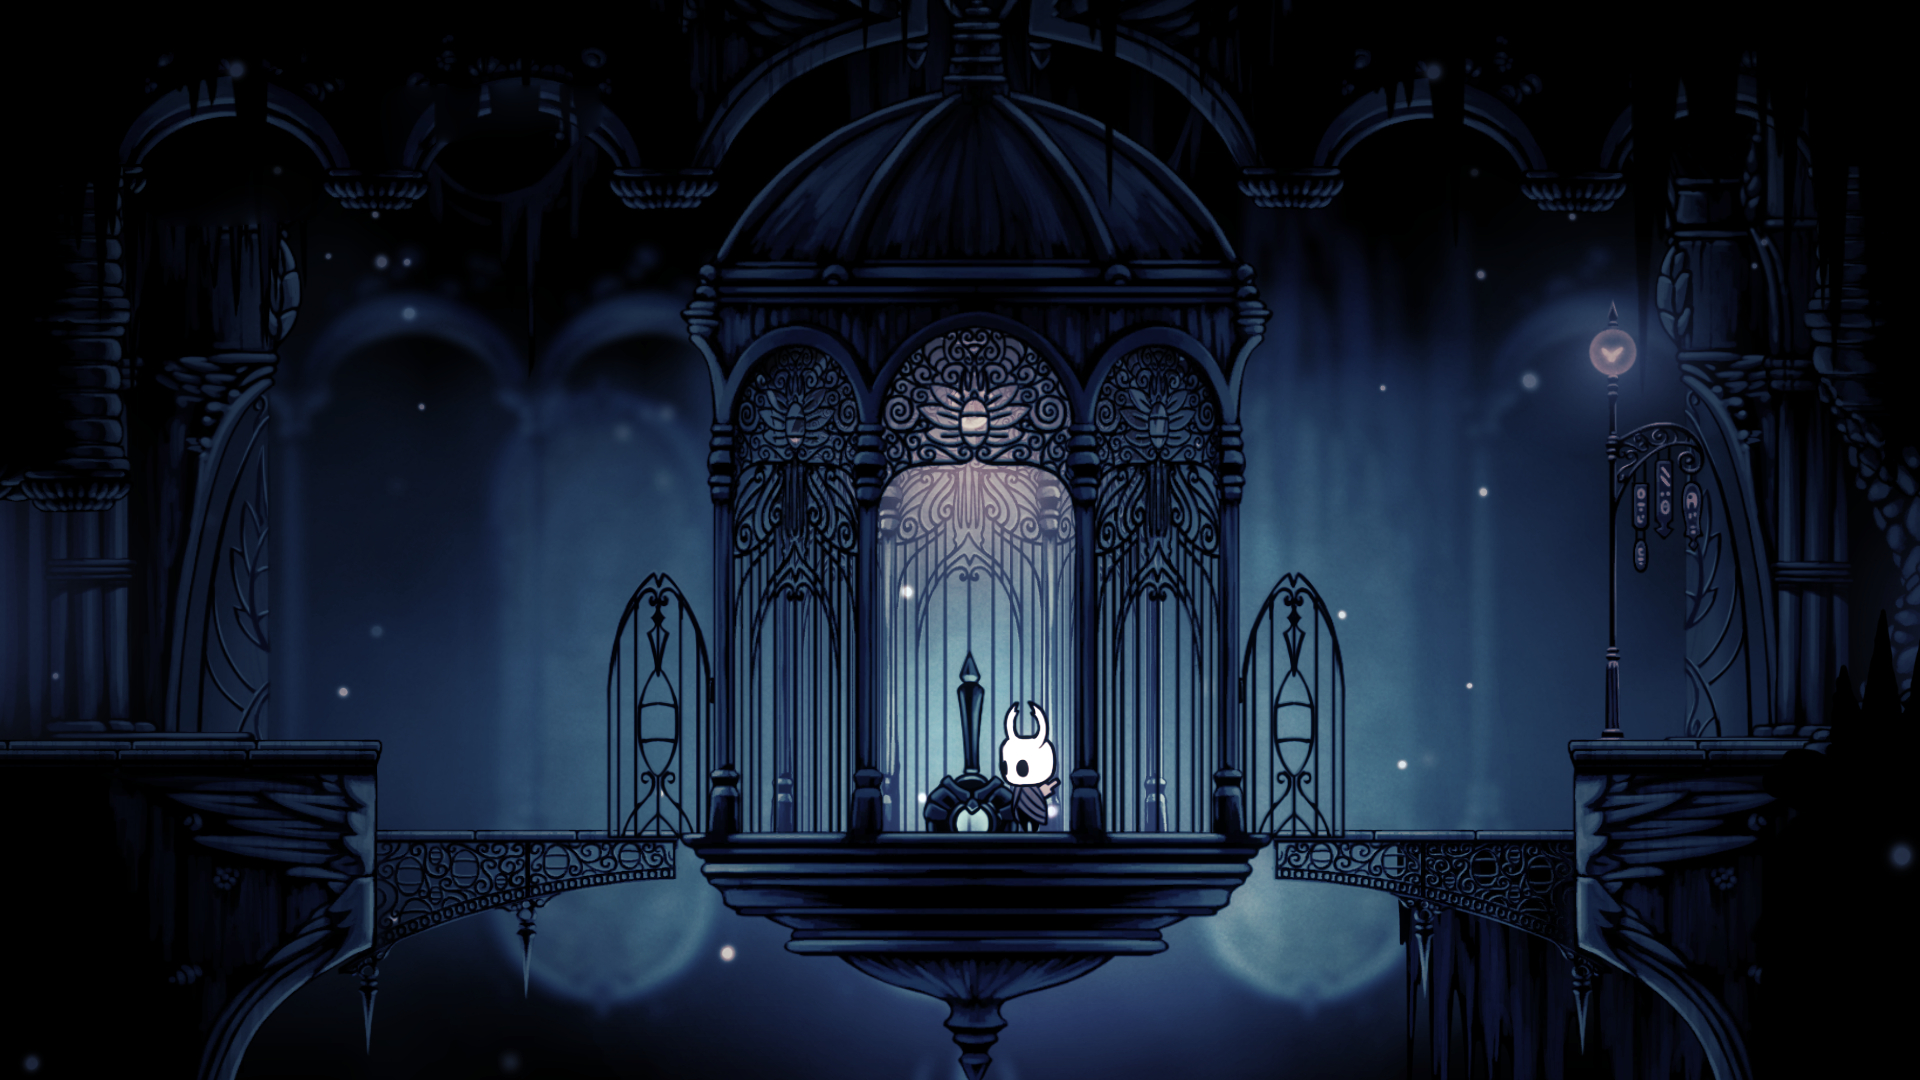 1920x1080 Some full hd wallpapers i made so far (just took a screenshot of a nice place and removed the hud), hop you like them. : r/HollowKnight